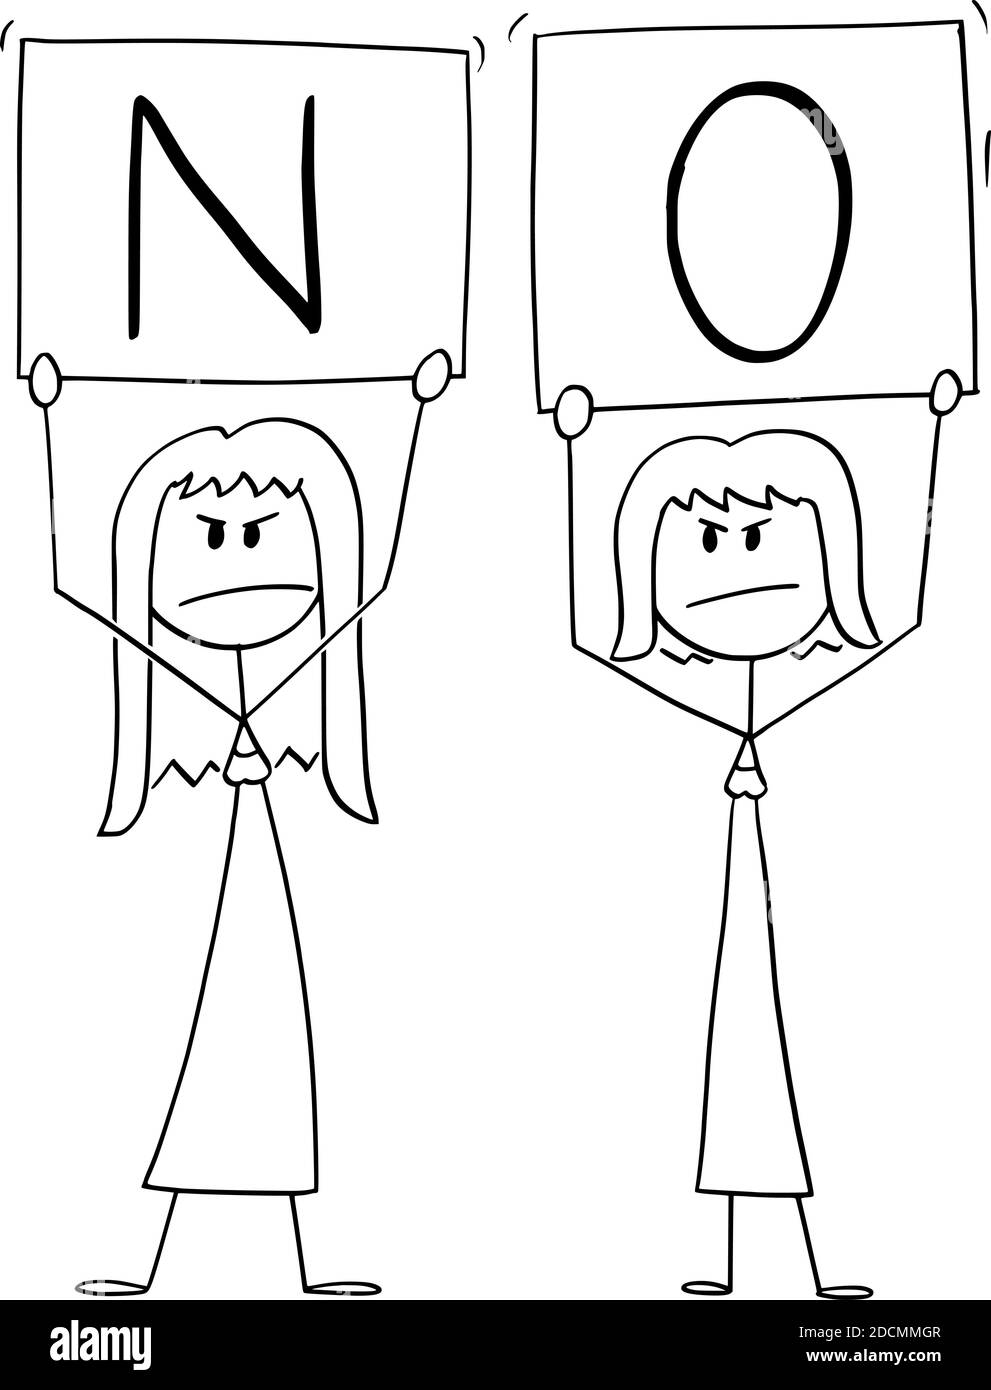 Vector cartoon stick figure illustration of two angry women holding no signs. Stock Vector